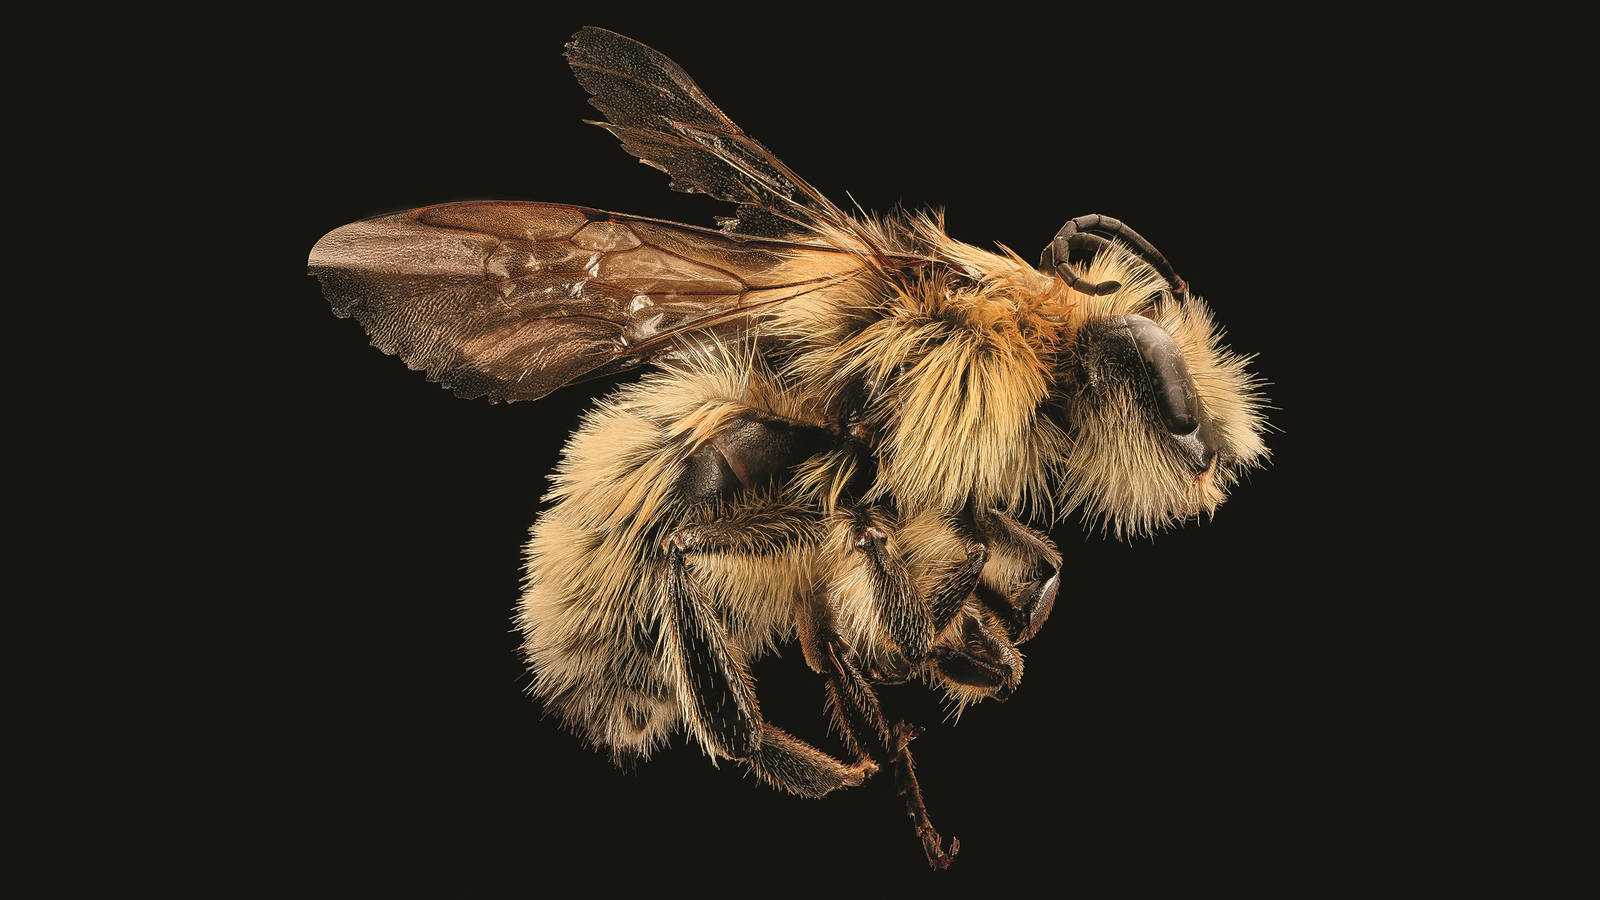 <h3 style="text-align: center; padding: 50px;"><span class="text-Intro-style"><em>Bombus vandykei</em> (bumblebee), Yosemite National Park, California. © SAM DROEGE/USGS BEE INVENTORY AND MONITORING LAB</span></h3>